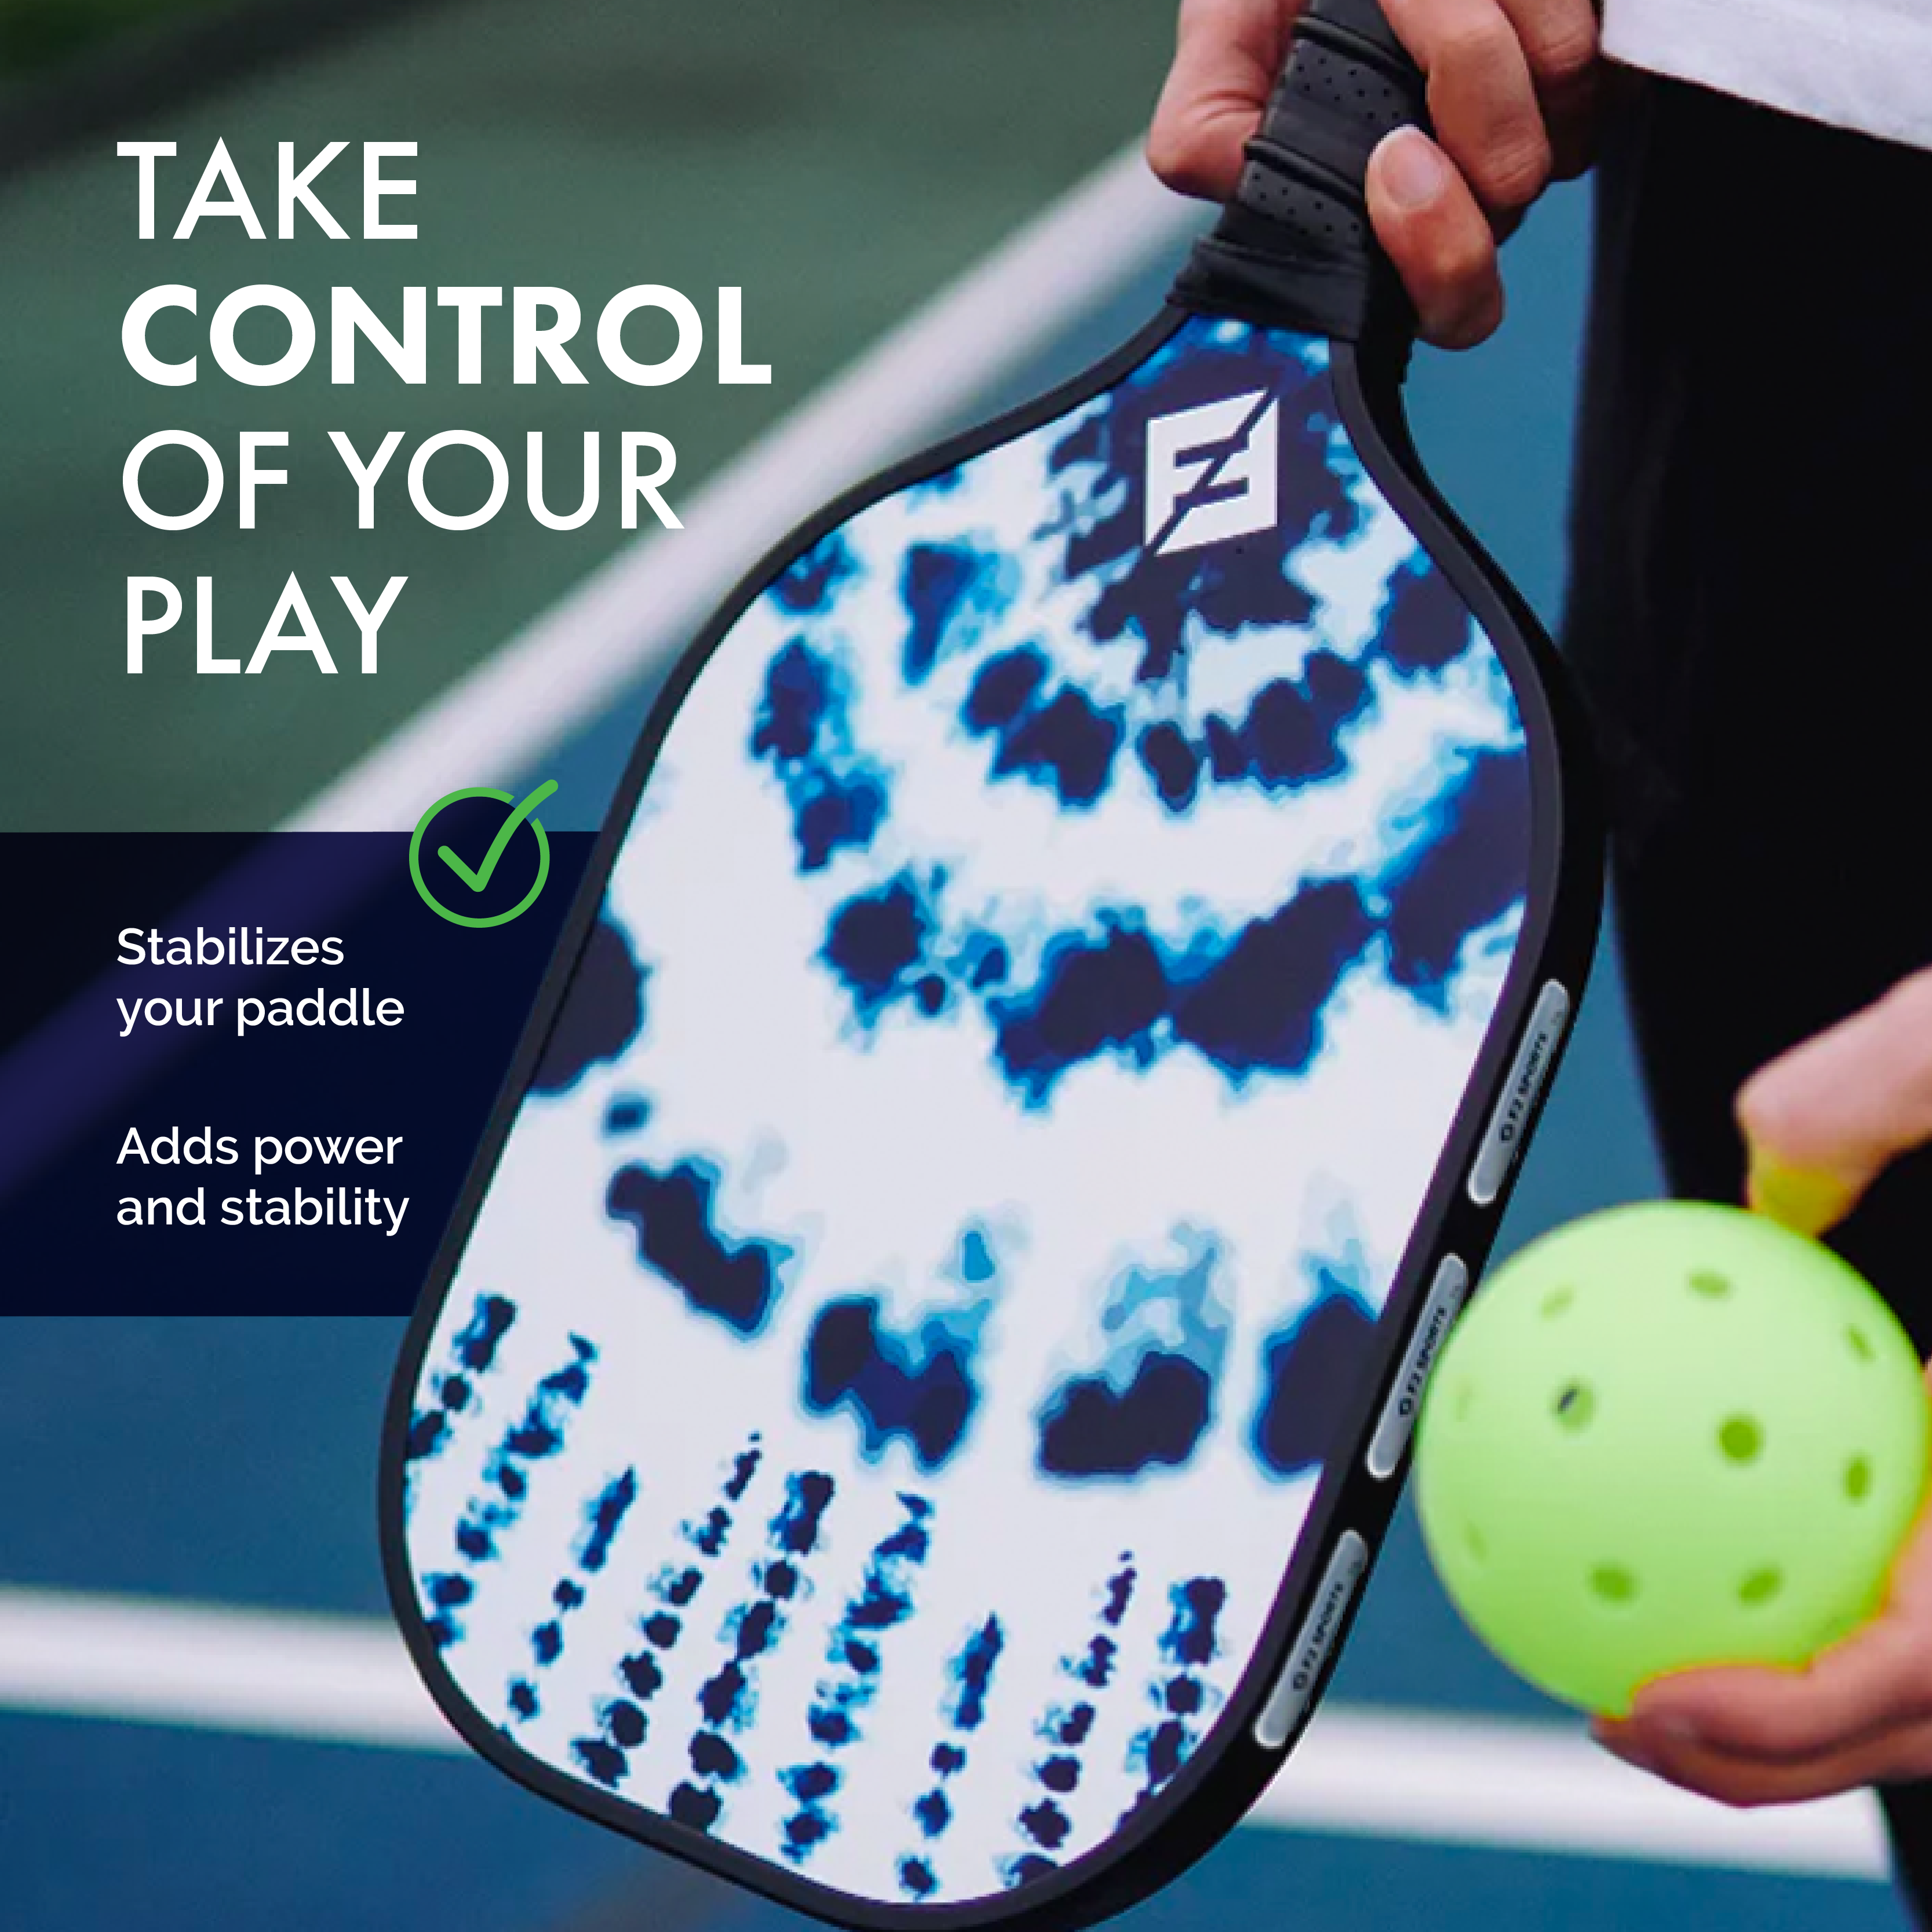 Should You Add Lead Tape to Your Pickleball Paddle?